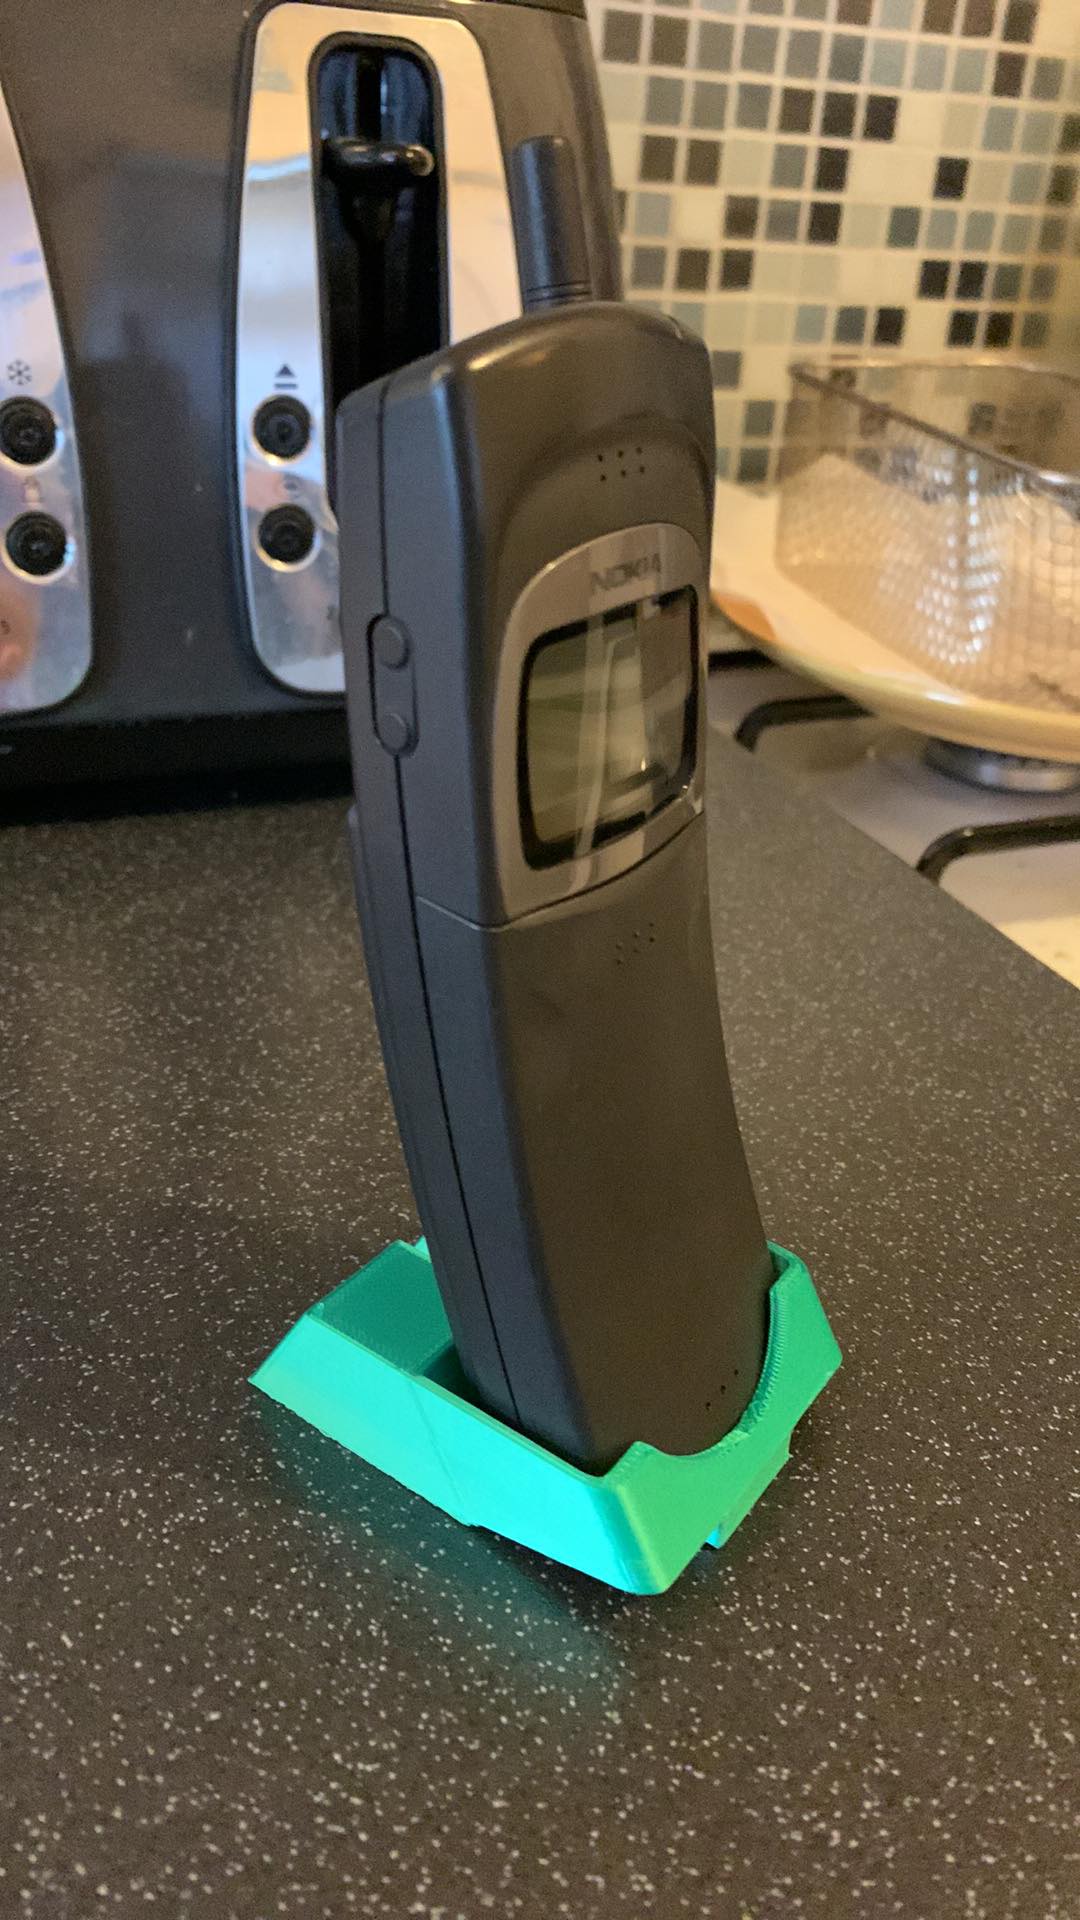 Stand for the 8110 Matrix phone